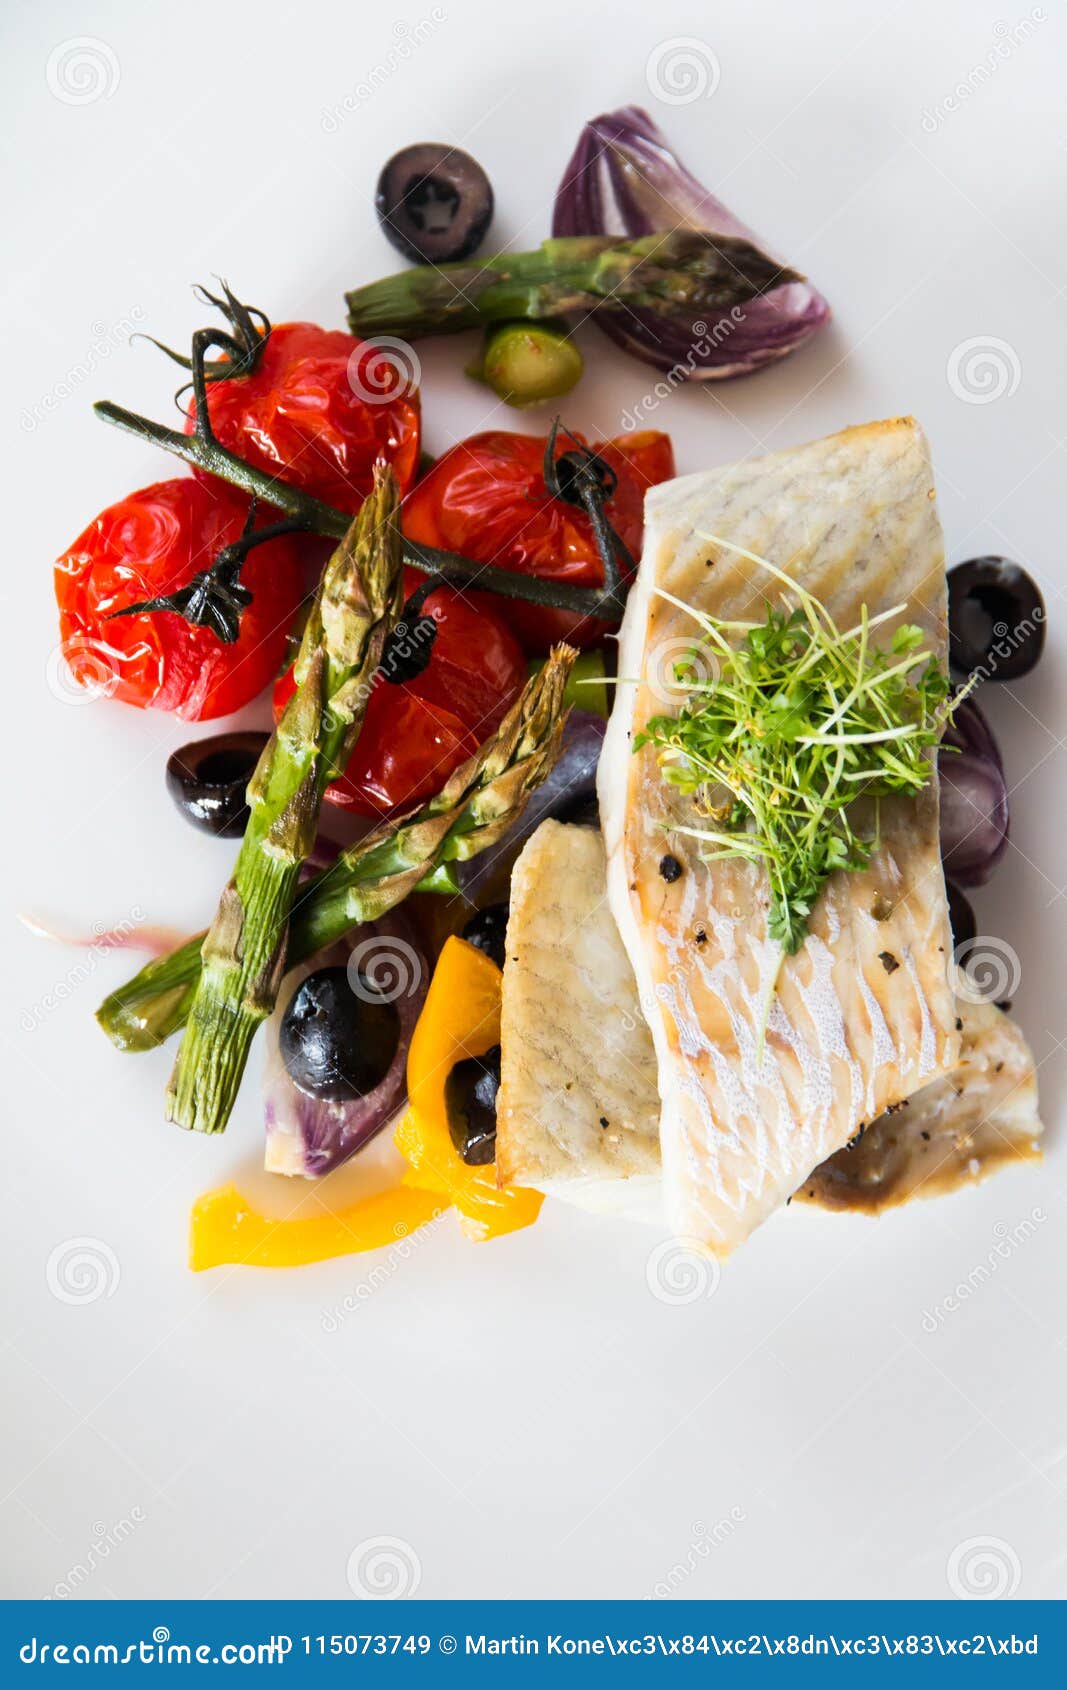 Baked Cod Fish with Asparagus Stock Image - Image of diet, filet: 115073749